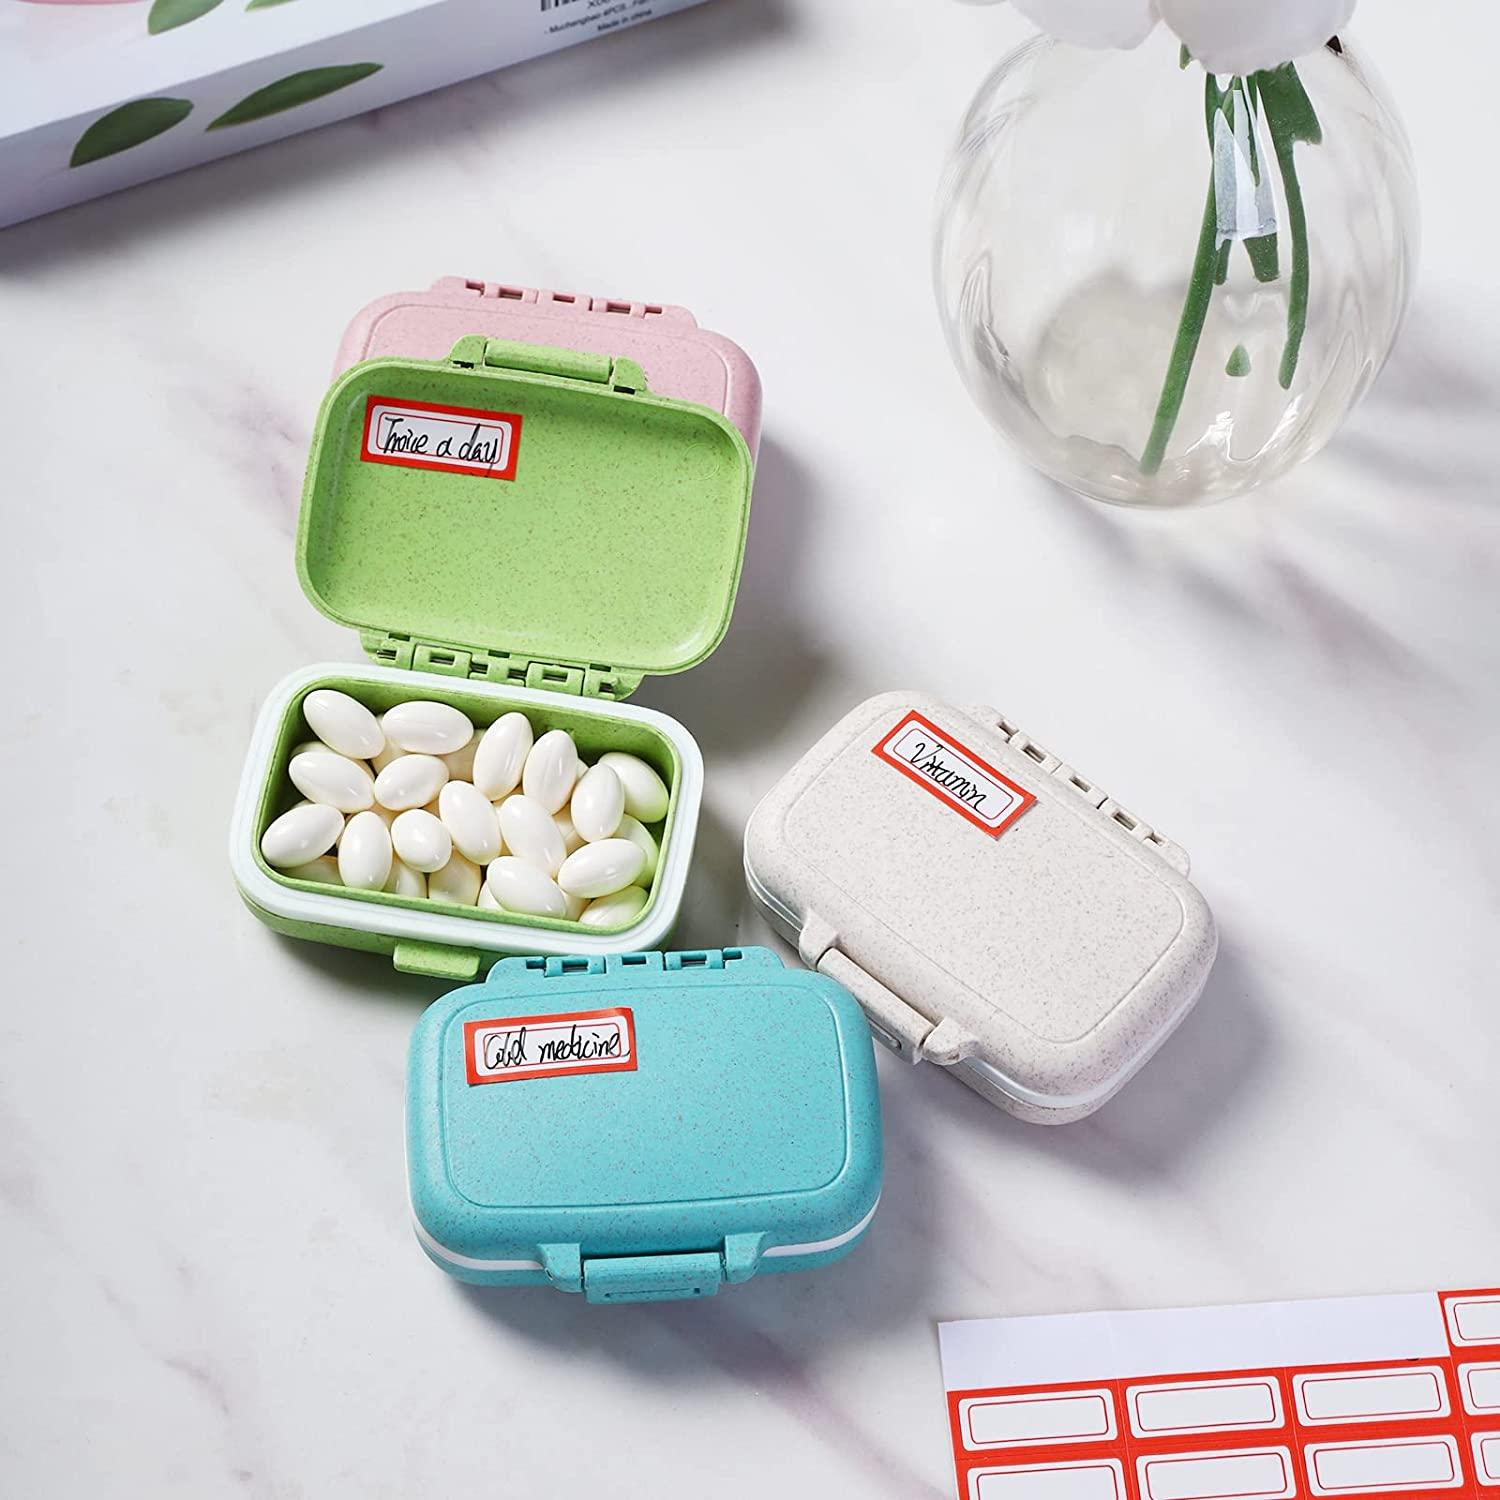 4 Pack Pill Case Portable Small Weekly Travel Pill Organizer